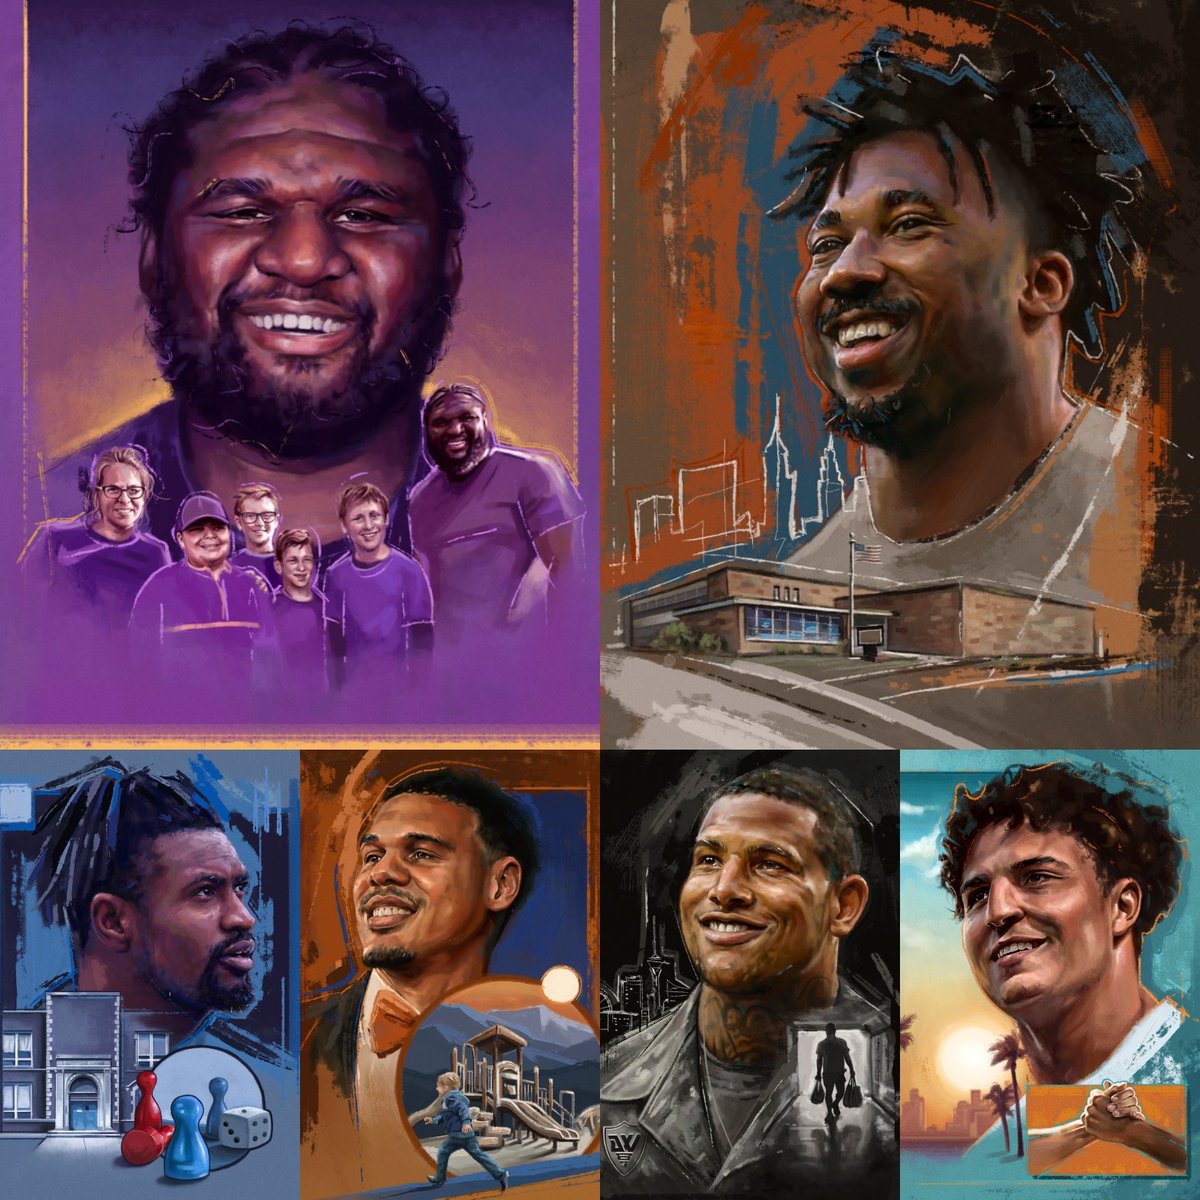 First quarter of work for the NFLPA / Heartlent group and their awesome Community MVP campaign 

Has been a blast to work on each week! And as always, thrilled to see and produce more sports illustration 😀 

#sportsart #sportsillustration